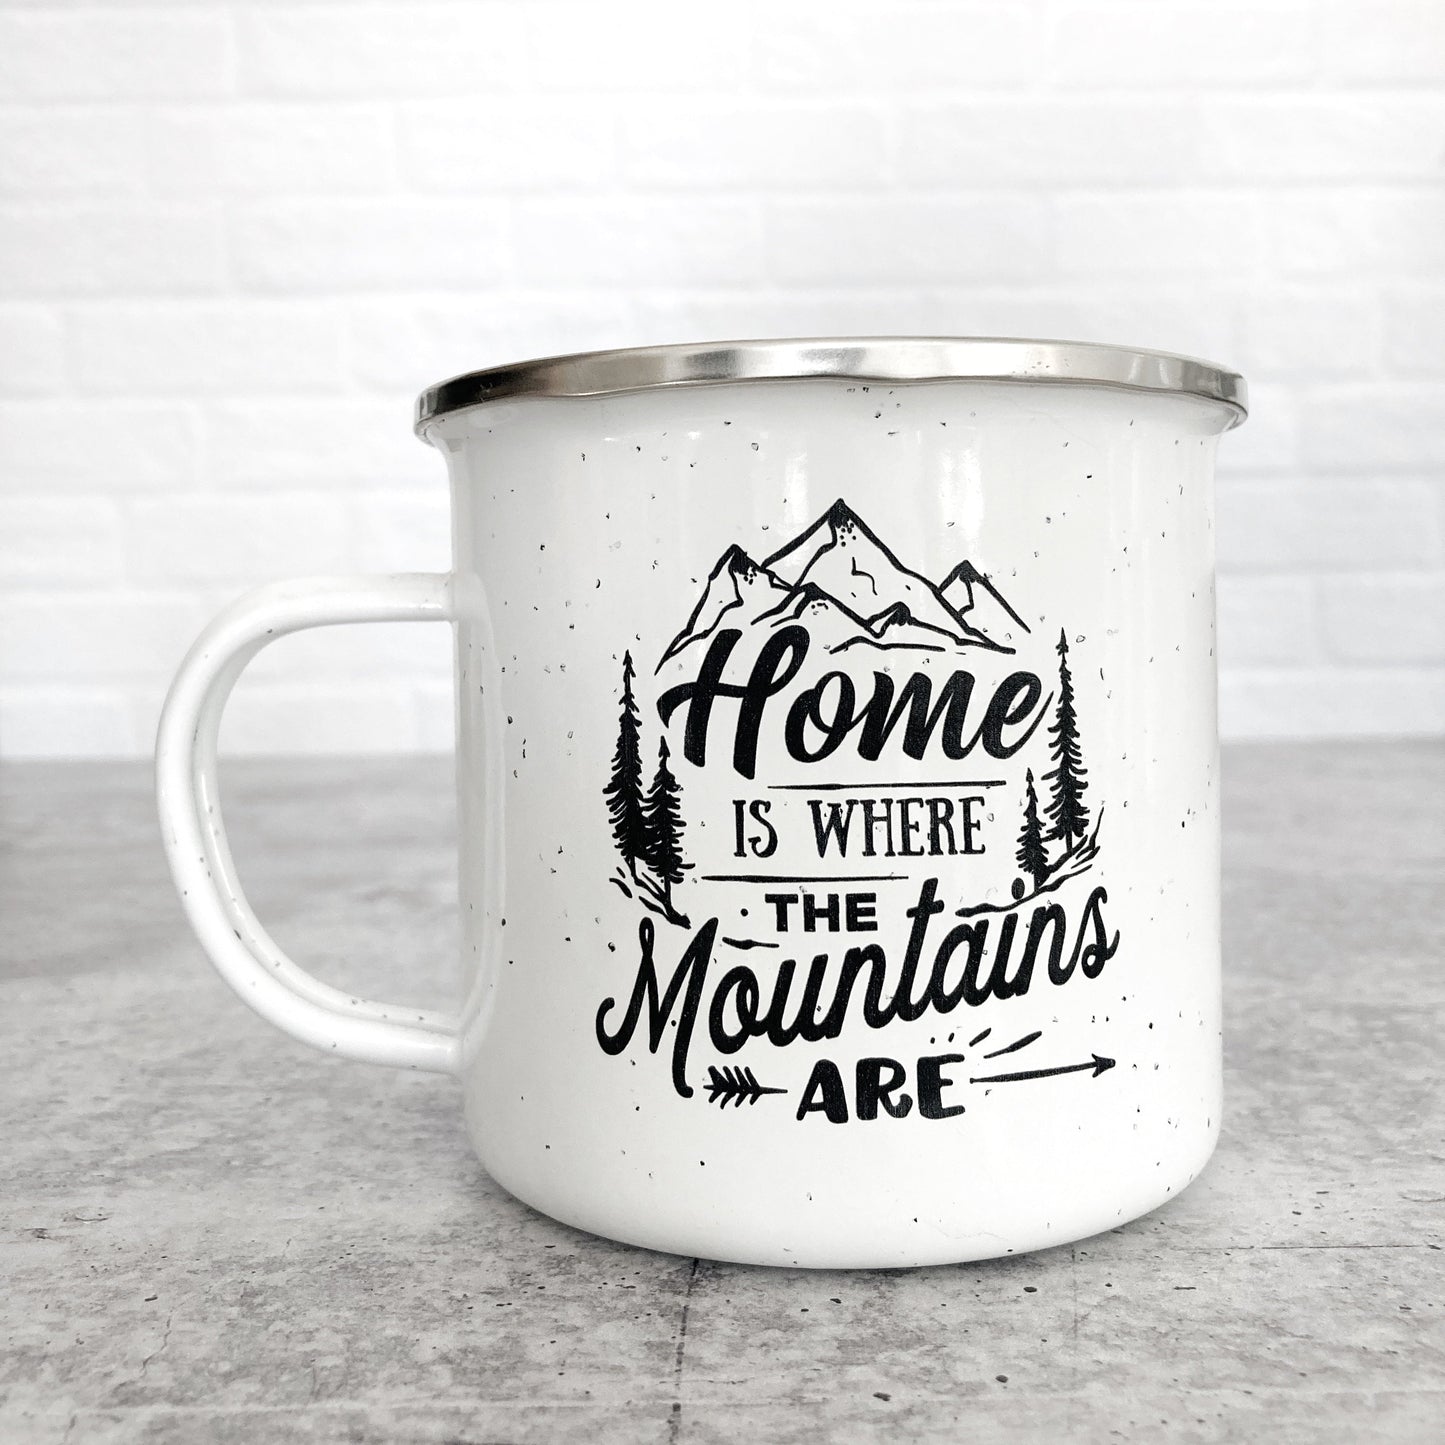 Home Is Where the Mountains Are design on a white enamel mug